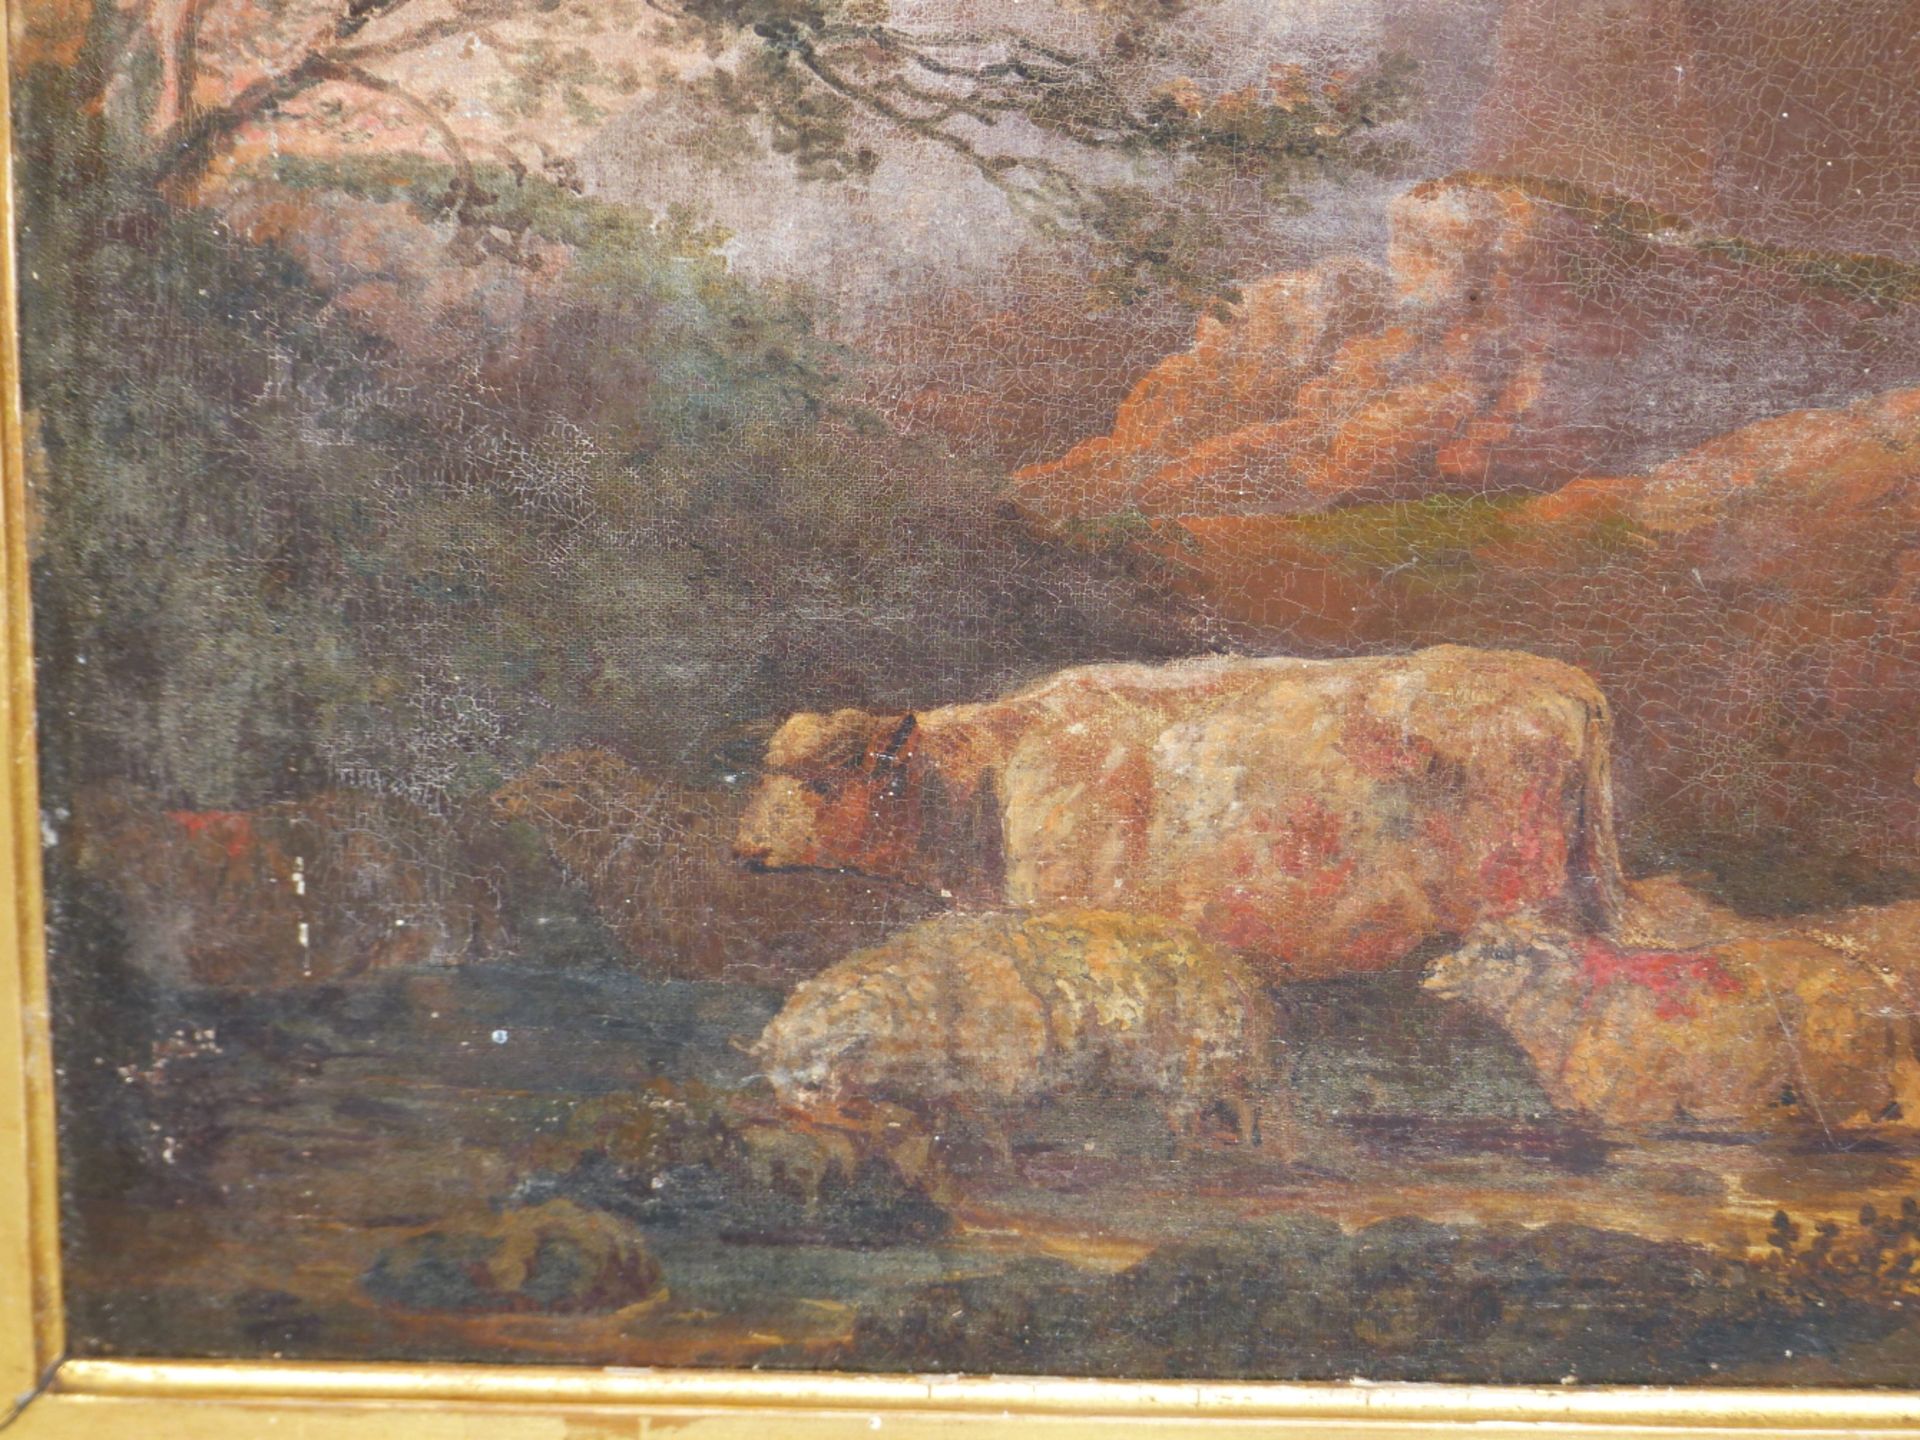 19th C. ENGLISH SCHOOL IN THE MANNER OF GEORGE MORLAND. HERDING THE CATTLE, OIL ON CANVAS. 41 x - Image 6 of 11